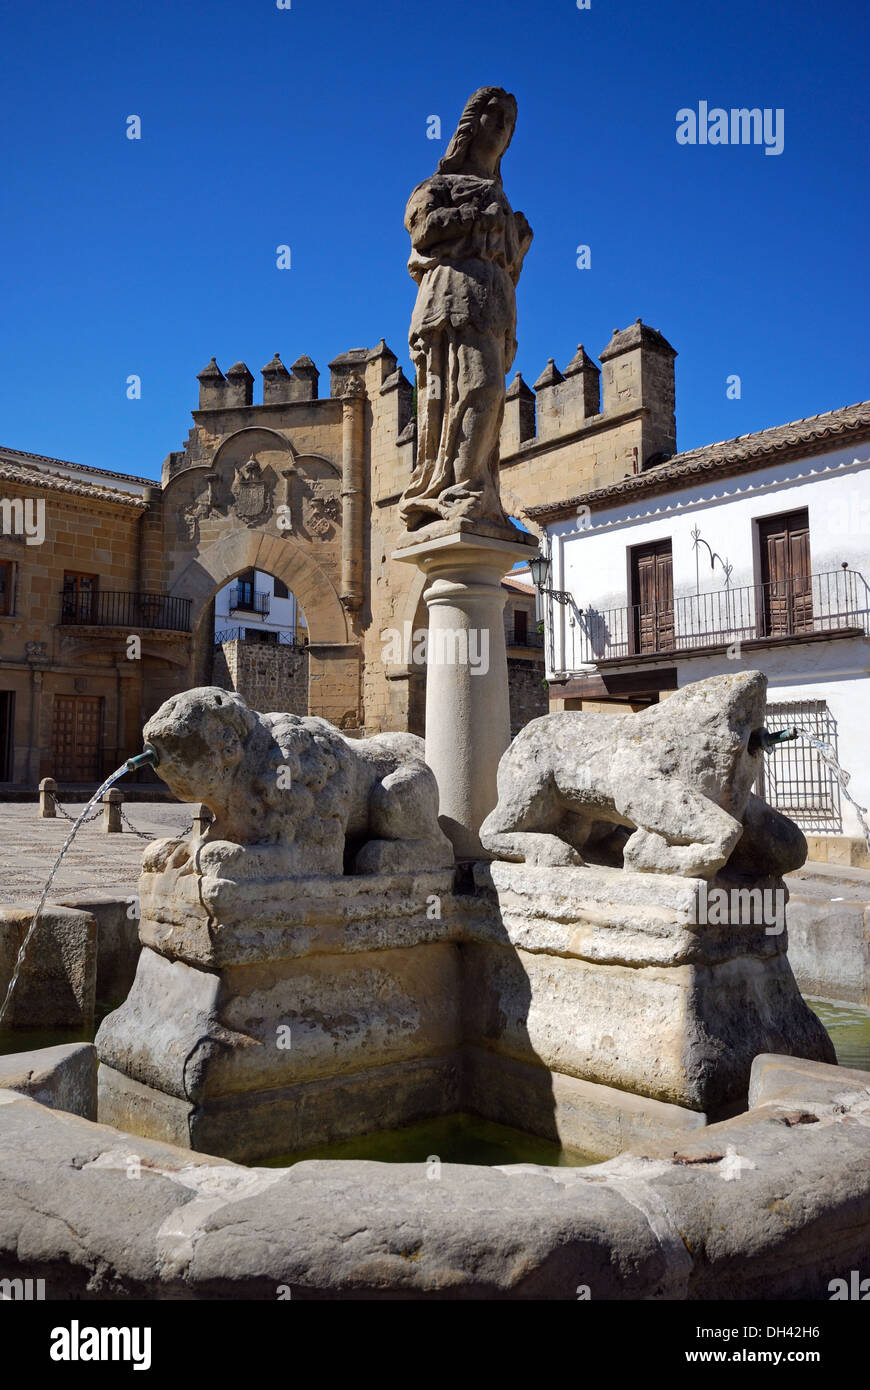 Fountain of the lions, Plaza de Populo (also called Plaza los Leones), Baeza,  Jaen Province, Andalusia, Spain, Western Europe Stock Photo - Alamy